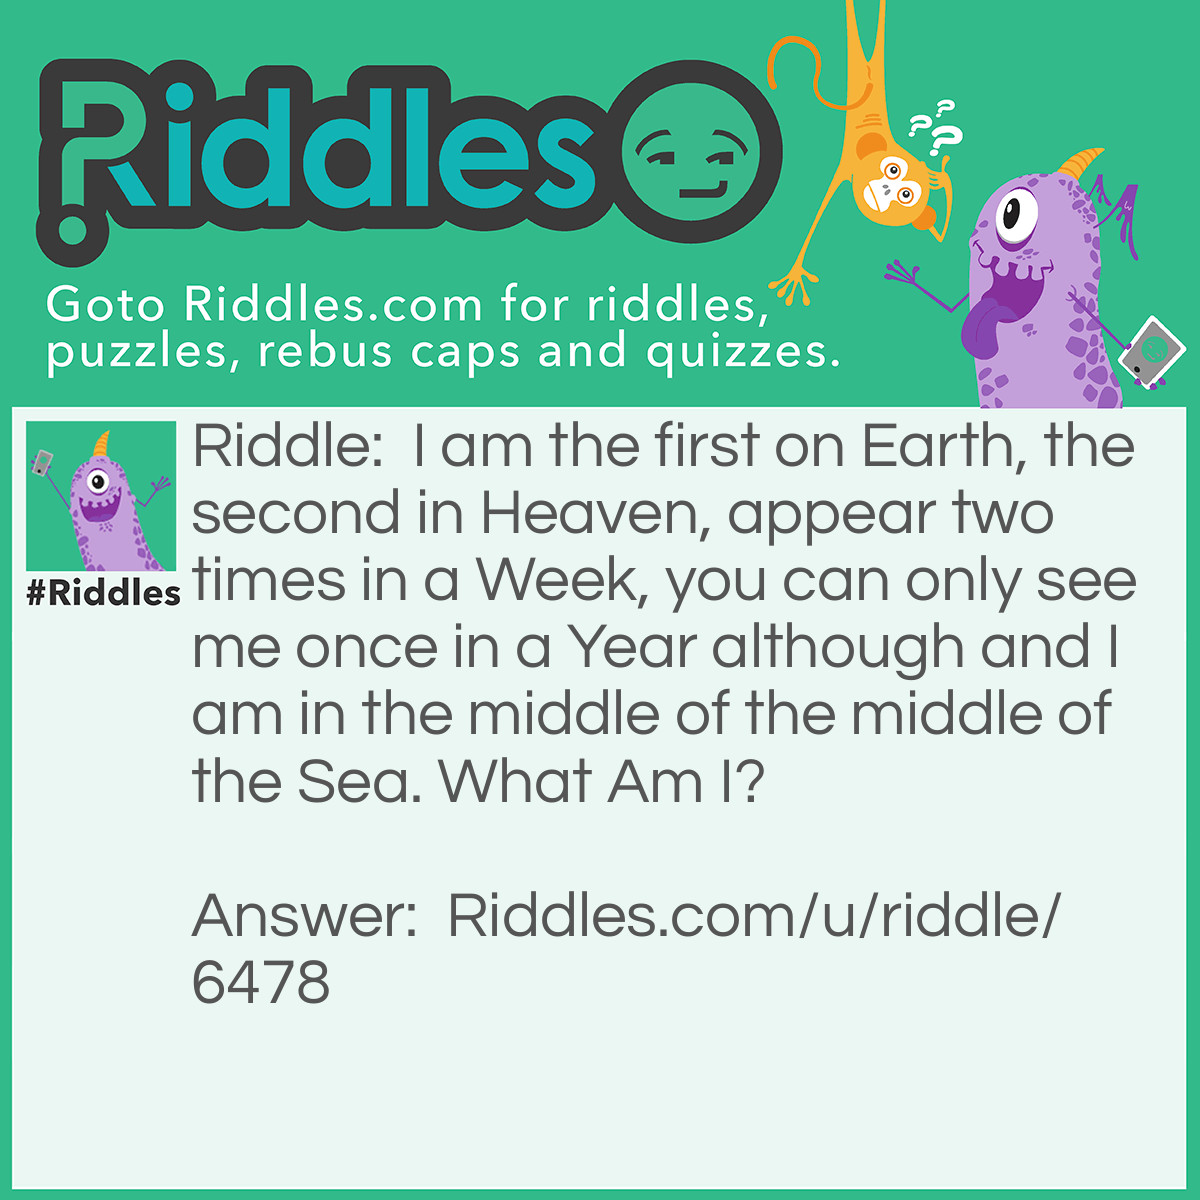 Riddle: I am the first on Earth, the second in Heaven, appear two times in a Week, you can only see me once in a Year although and I am in the middle of the middle of the Sea. What Am I? Answer: The Letter E.